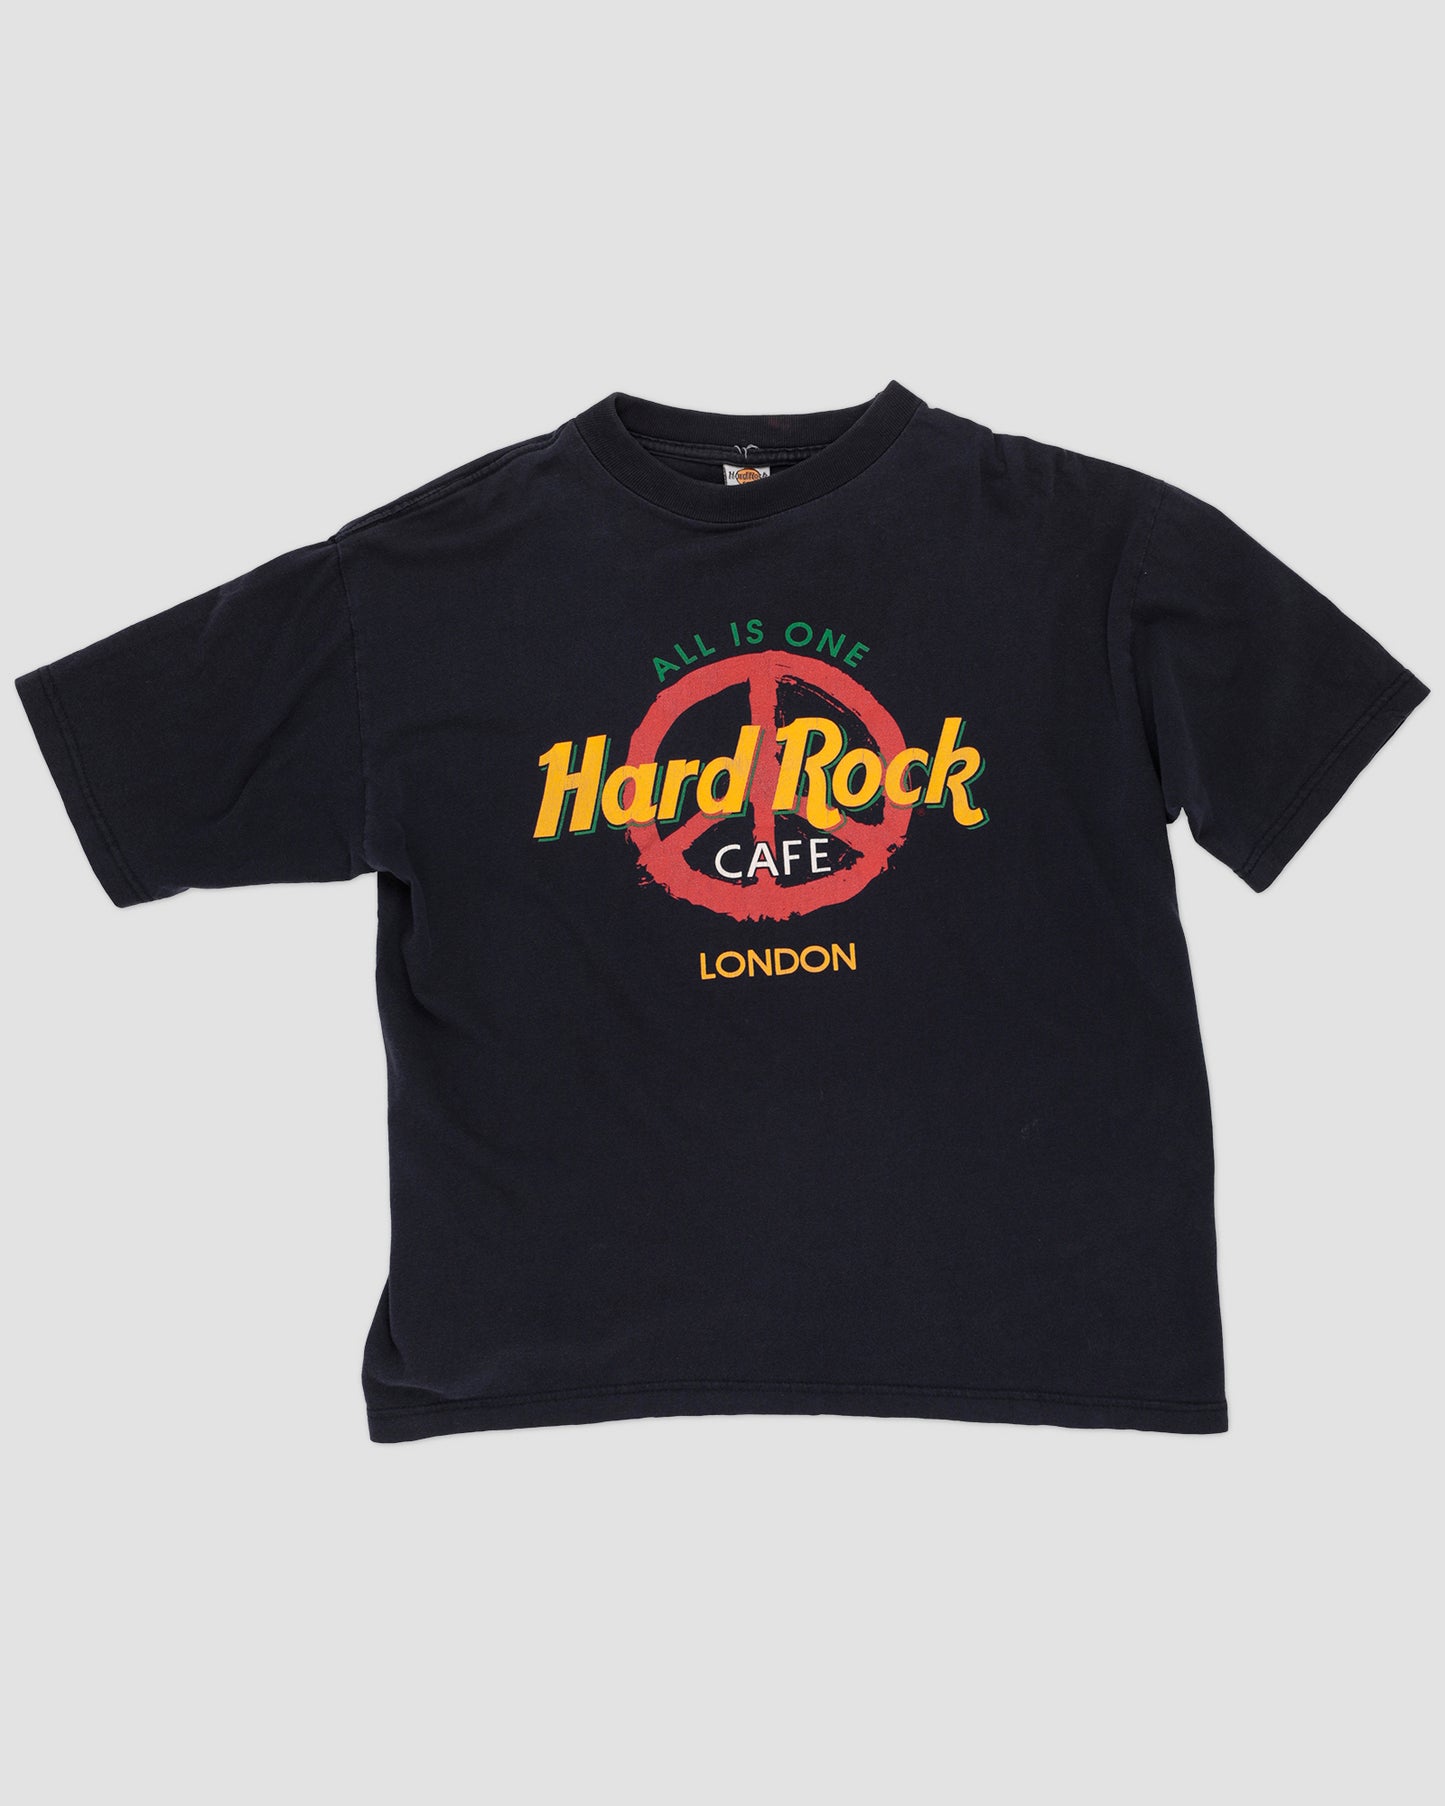 T-shirt Vintage 90s Hard Rock Cafe All Is One London L